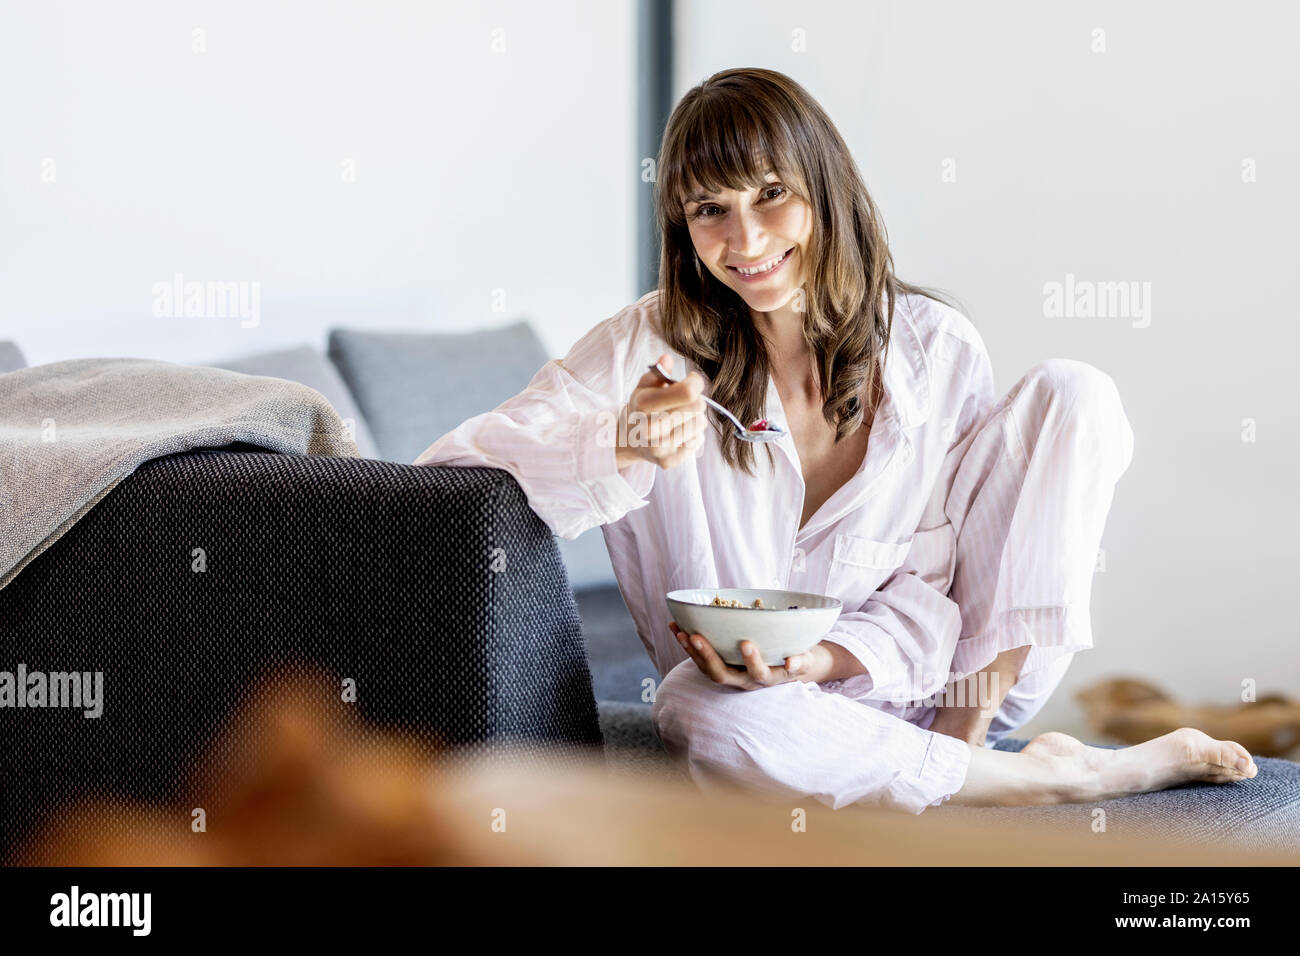 Portrait of smiling woman having breakfast on couch at home Stock Photo